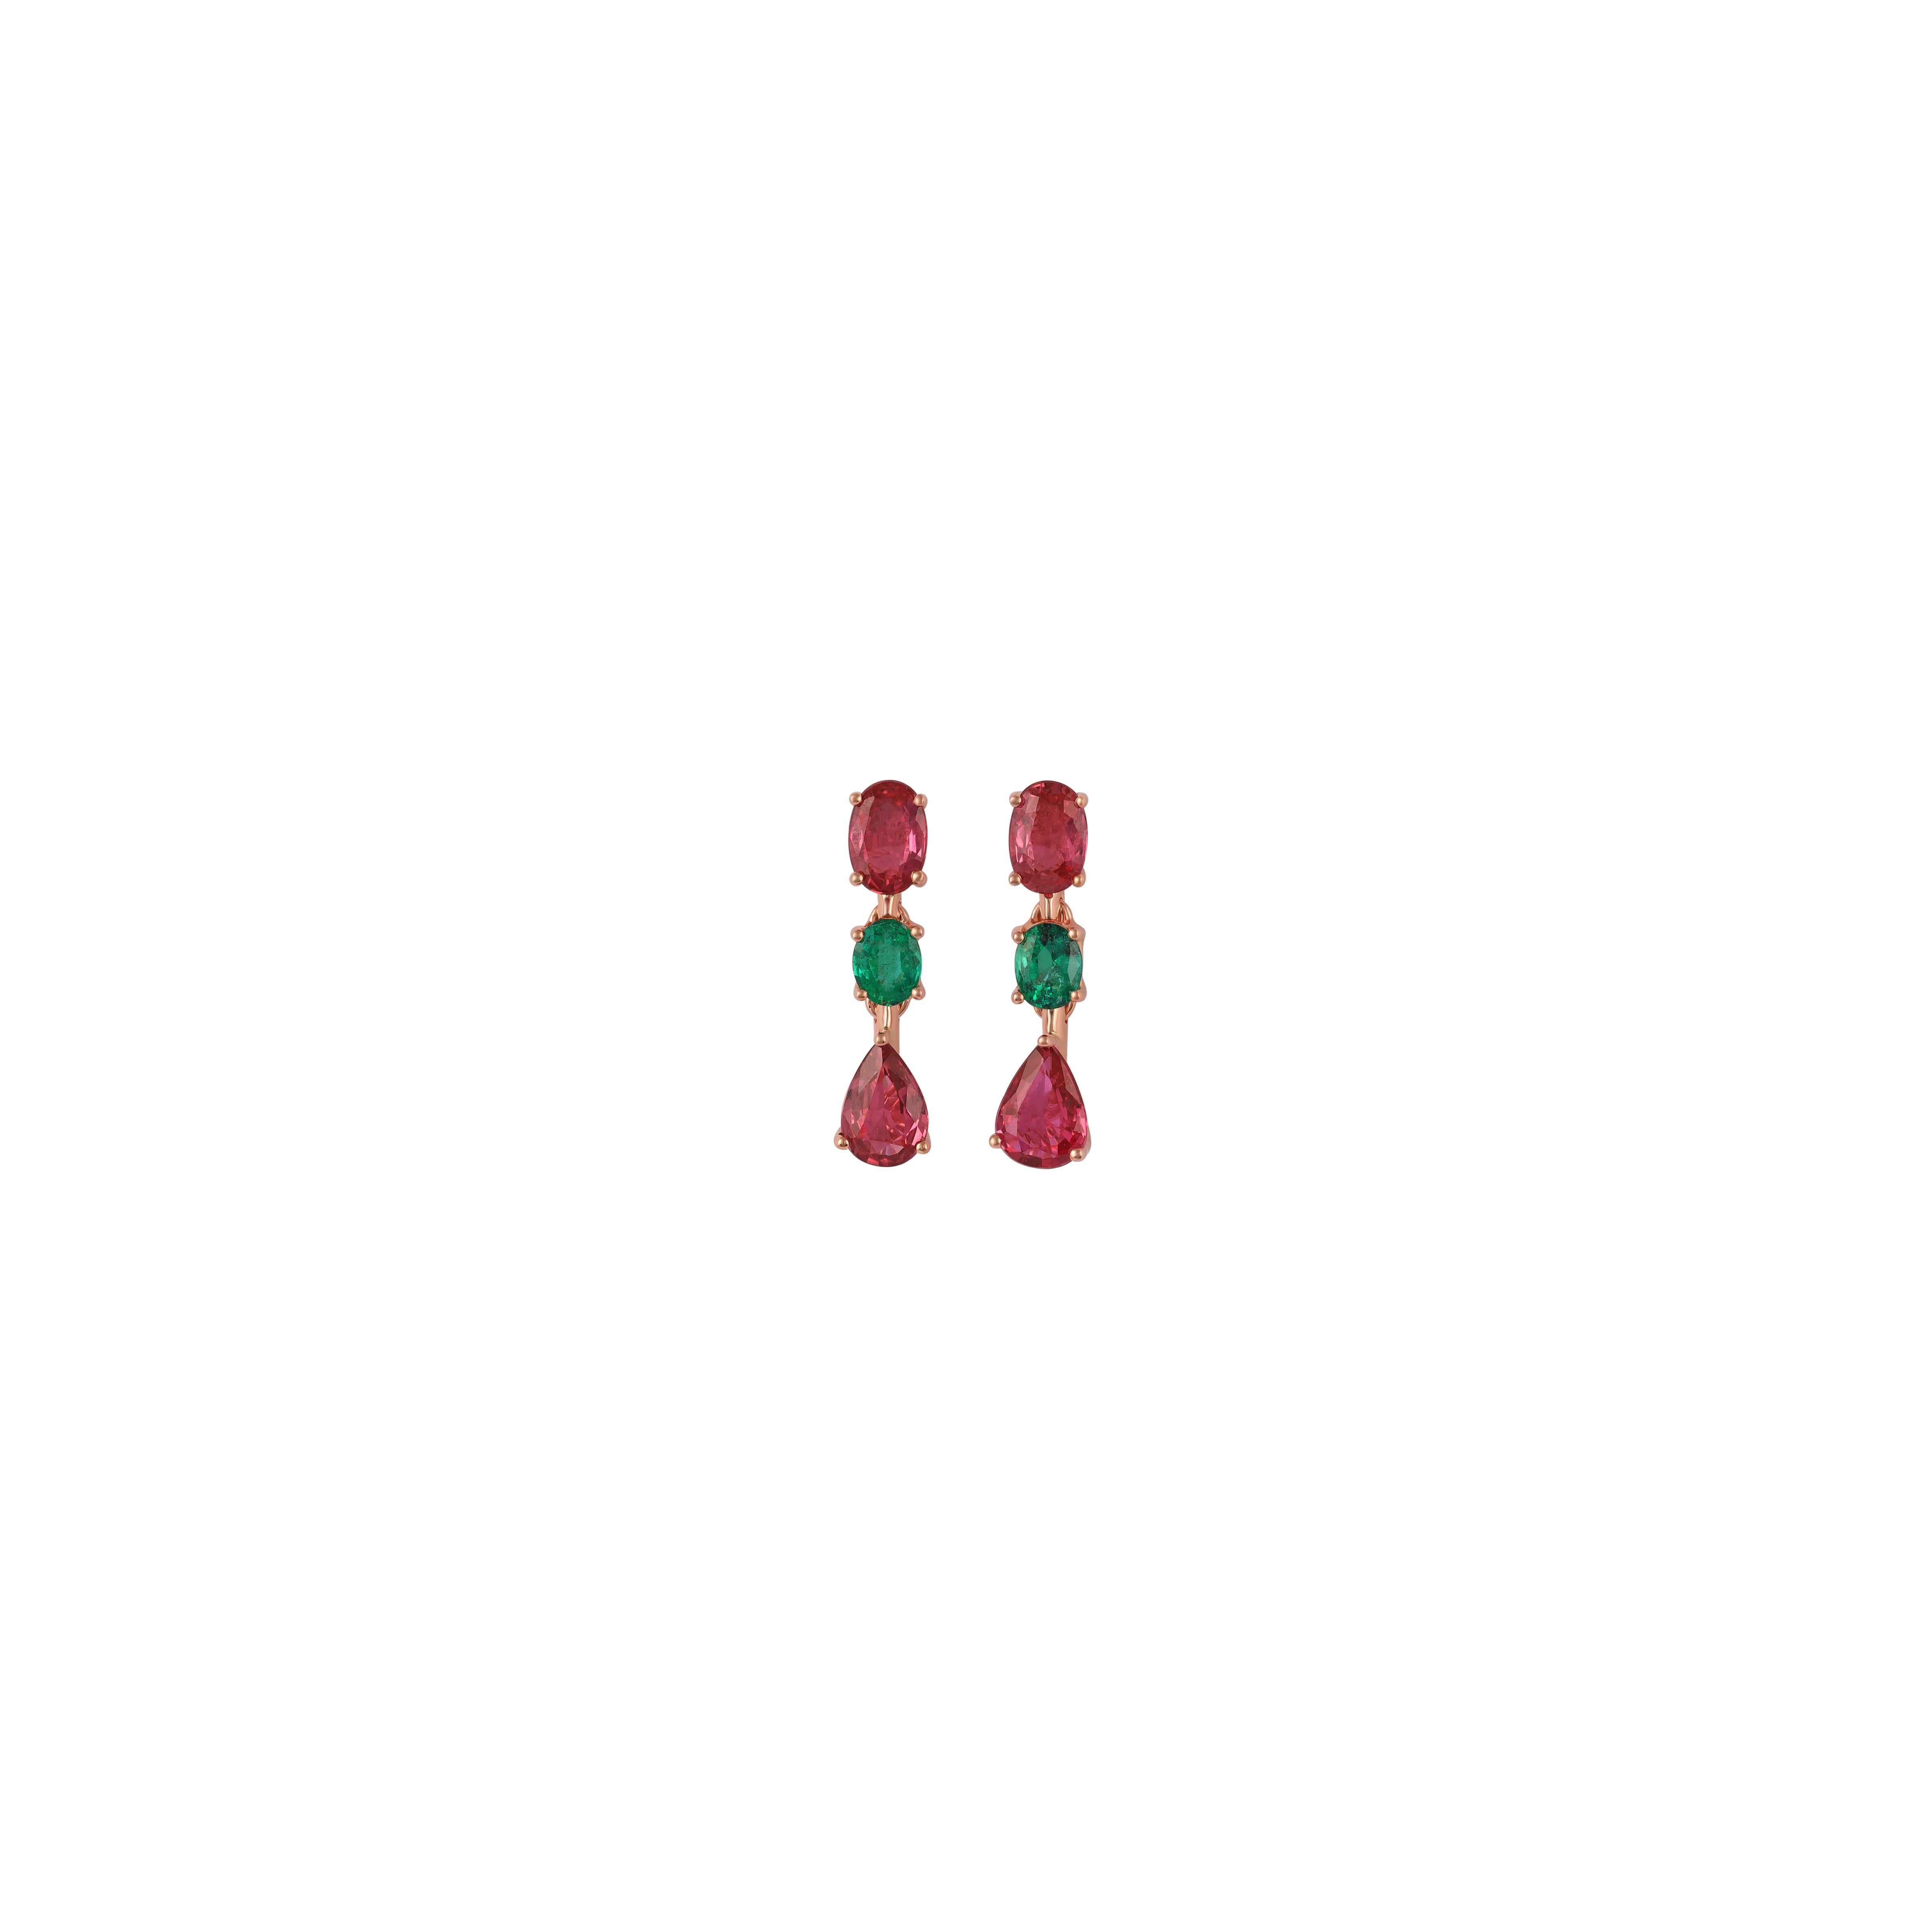 Magnificent Mozambique Ruby & Emerald Stud Earrings
 Mozambique Ruby approx. 2.43 CTS
Emerald  approx. 0.49 CTS
18 k gold mounting 2.68 GMS

Custom Services
Request Customization